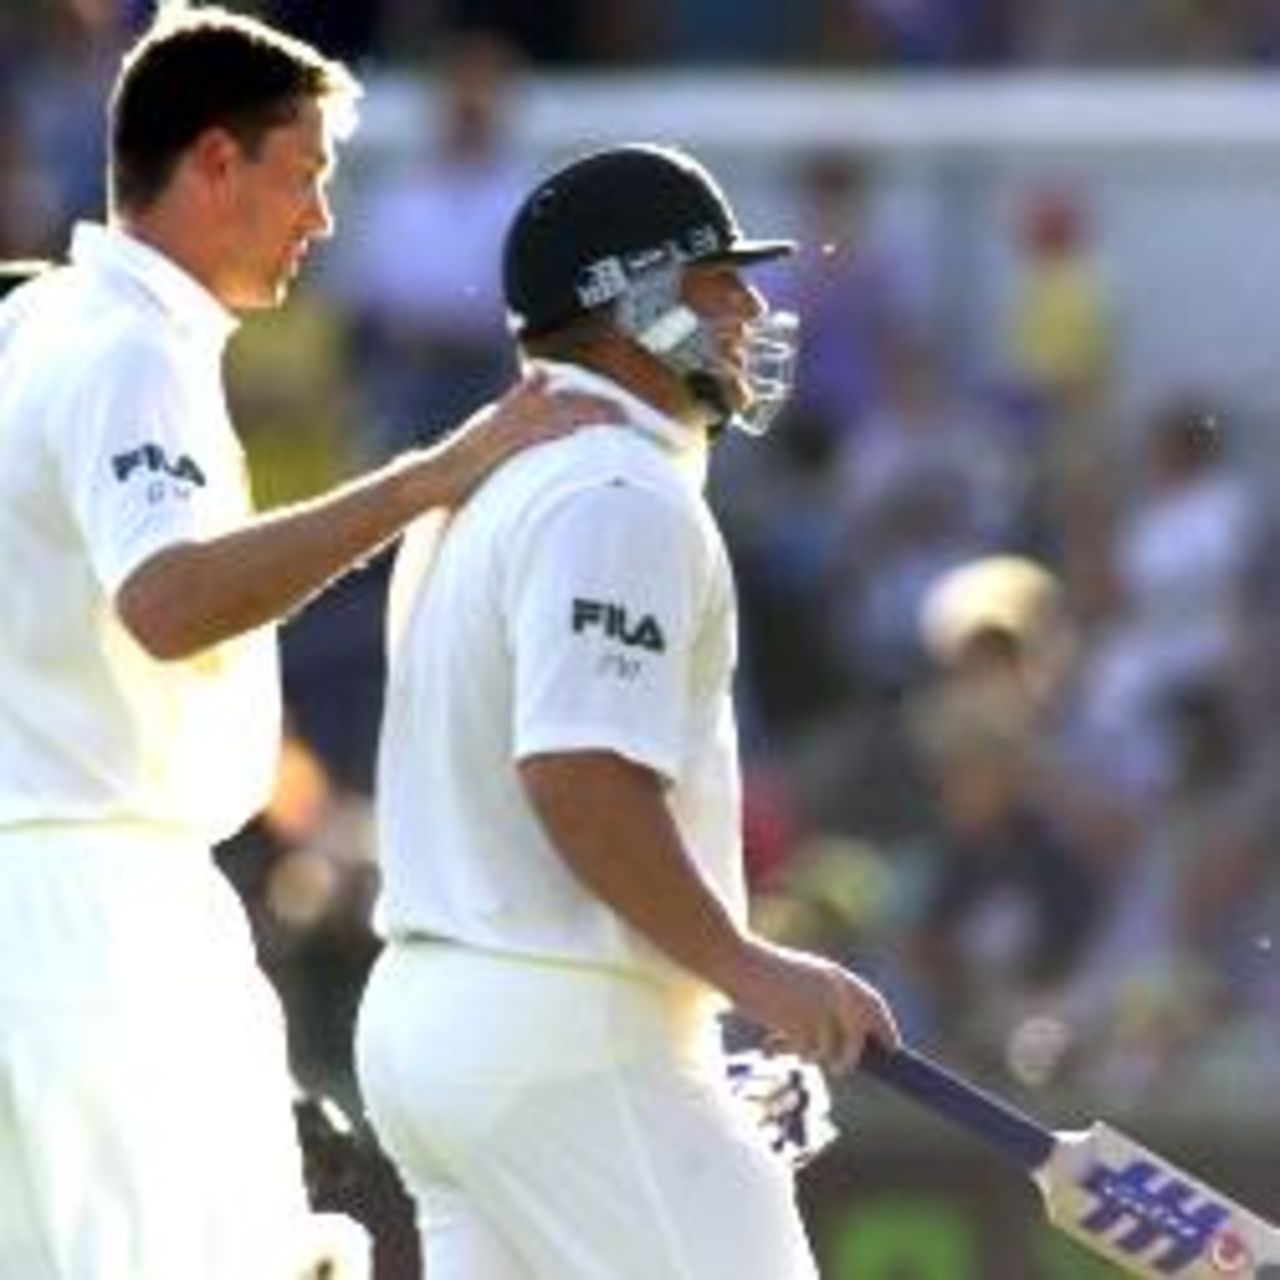 2 Dec 2001: A dejected Shane Warne of Australia is consoled by team mate Glenn McGrath, after being caught by Mark Richardson of New Zealand for 99 off the bowling of Daniel Vettori, during day three of the Third Test between Australia and New Zealand, played at The WACA, Perth, Australia.